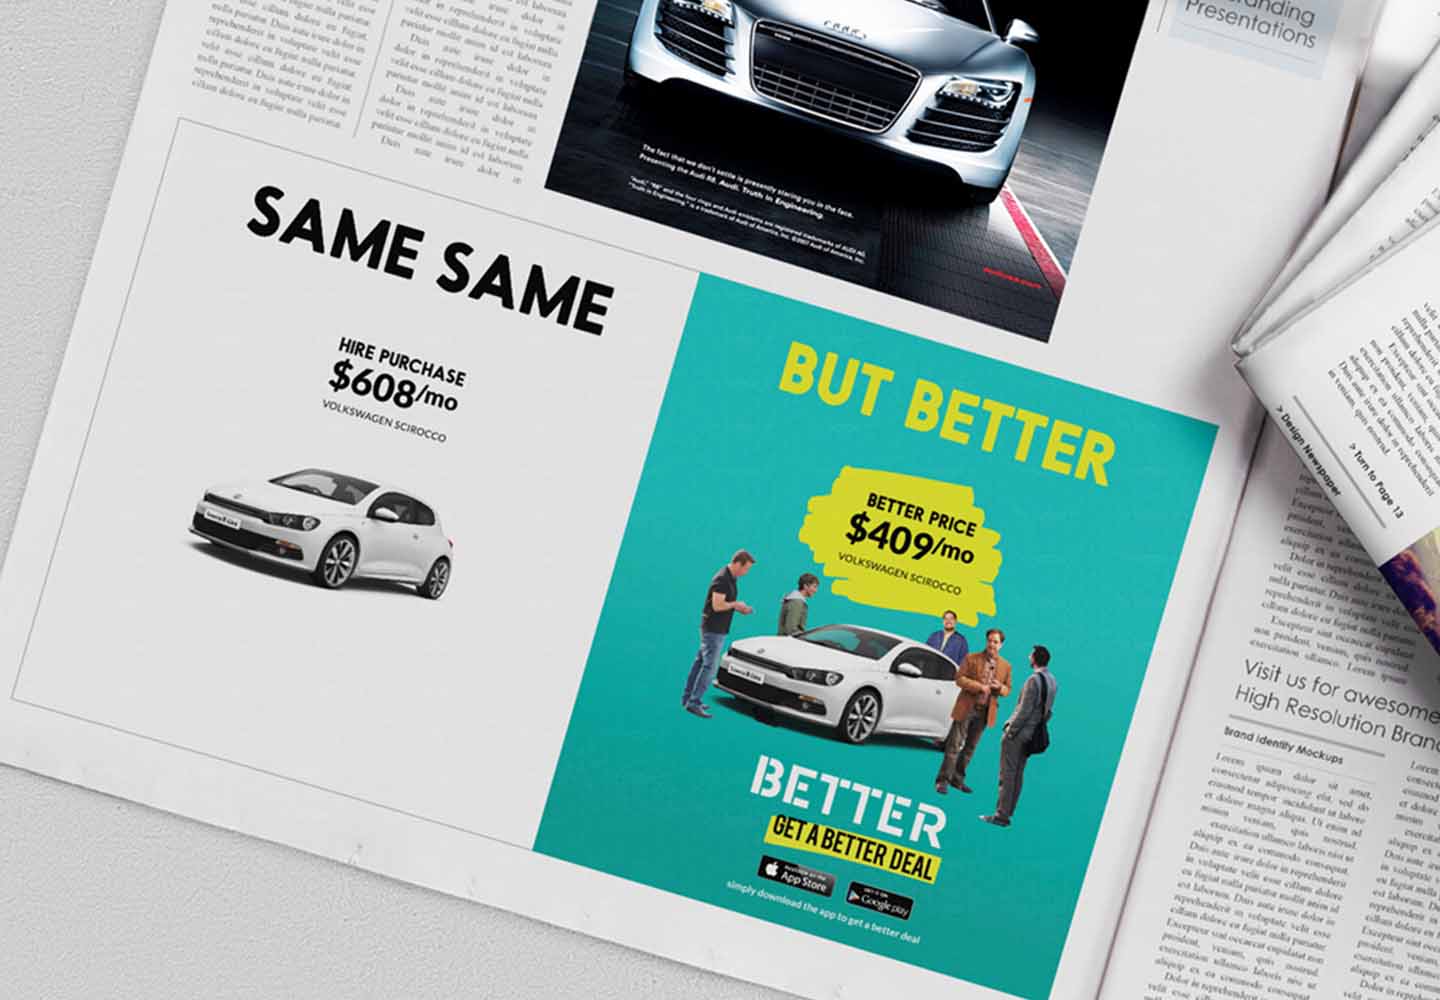 Brand Consultancy in Automotive Industry. Newspaper Ad for Better.